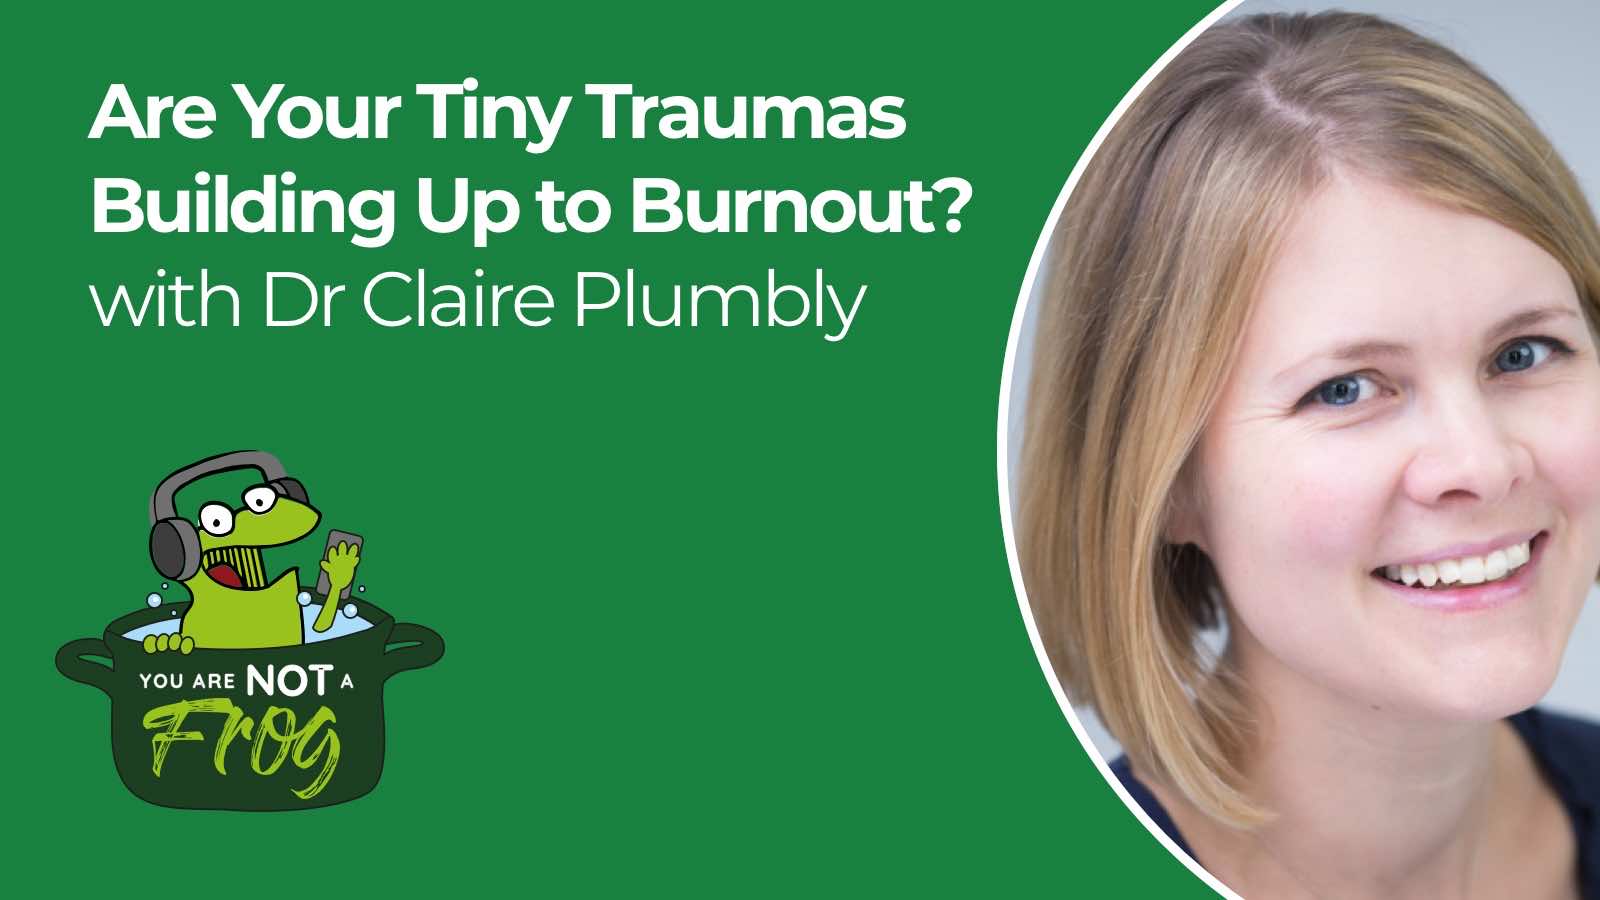 Are Your Tiny Traumas Building Up to Burnout?